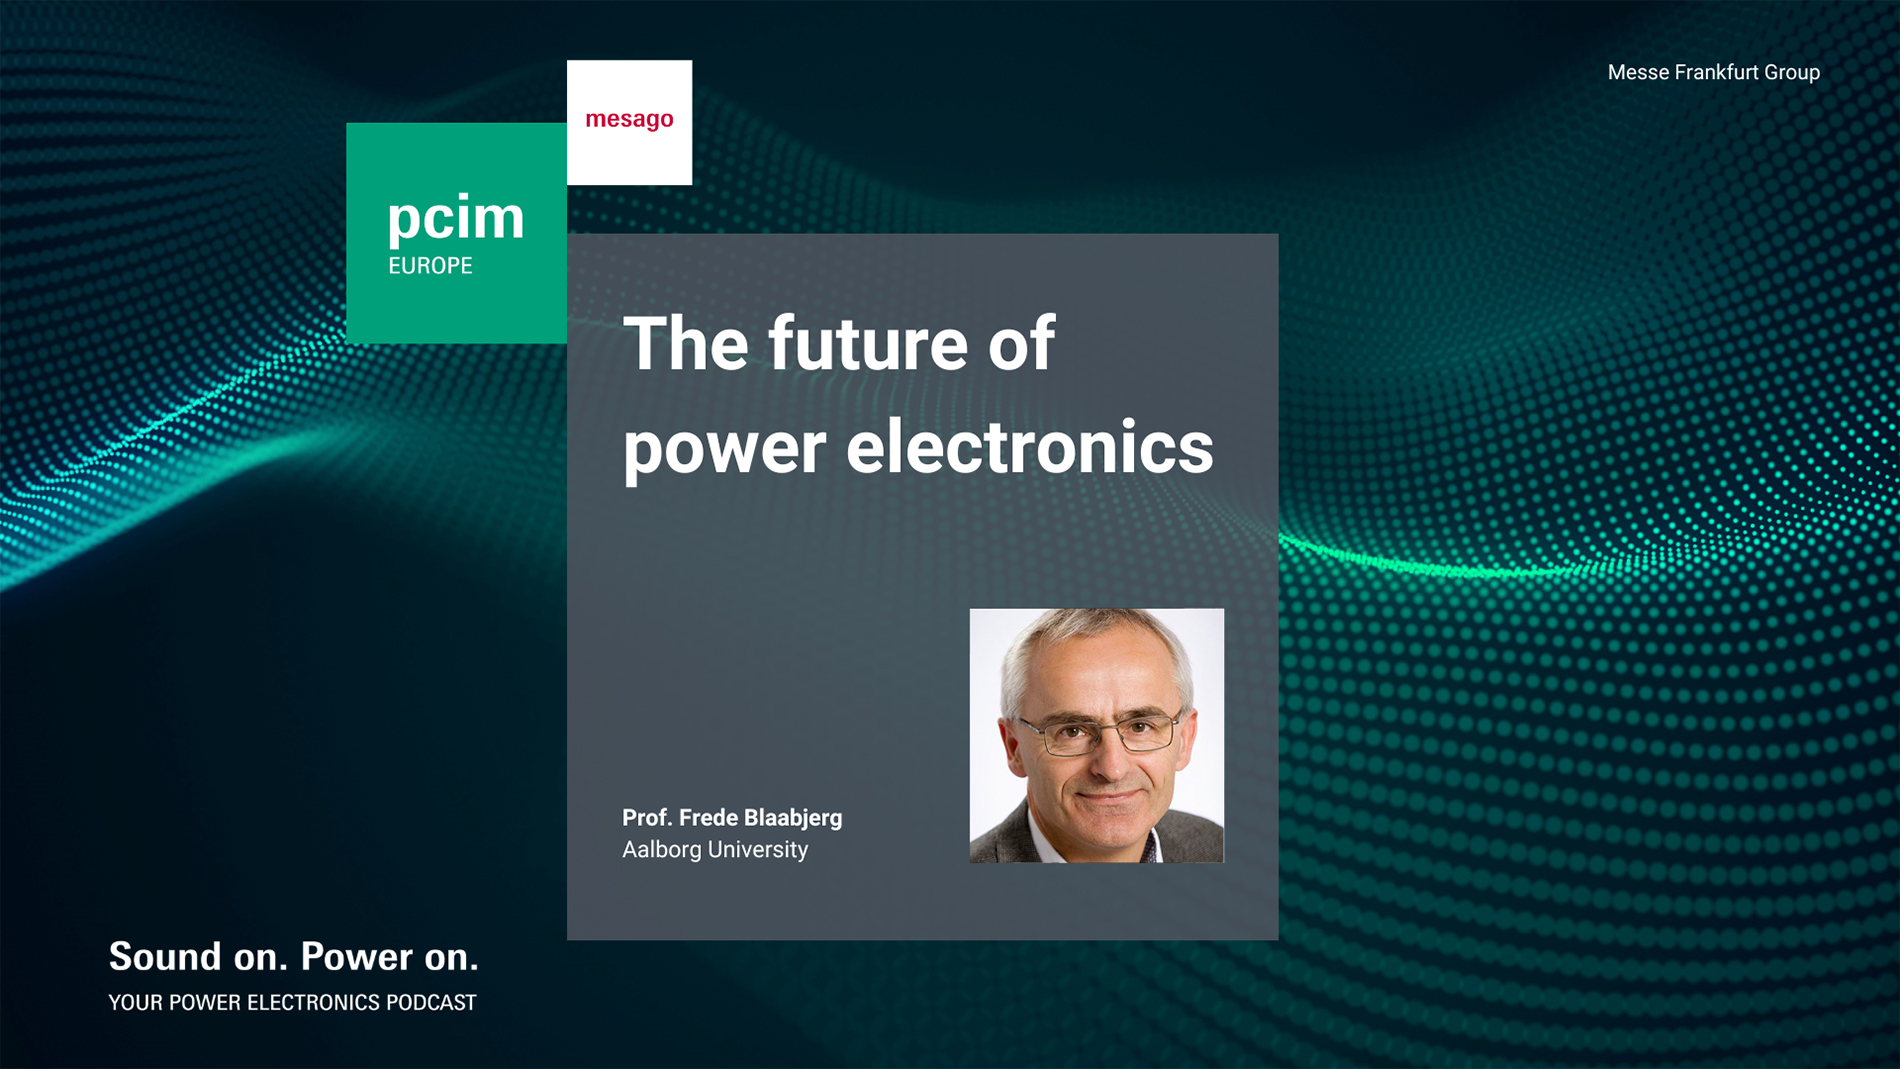 “Future trends in power electronics” with Frede Blaabjerg, Aalborg University